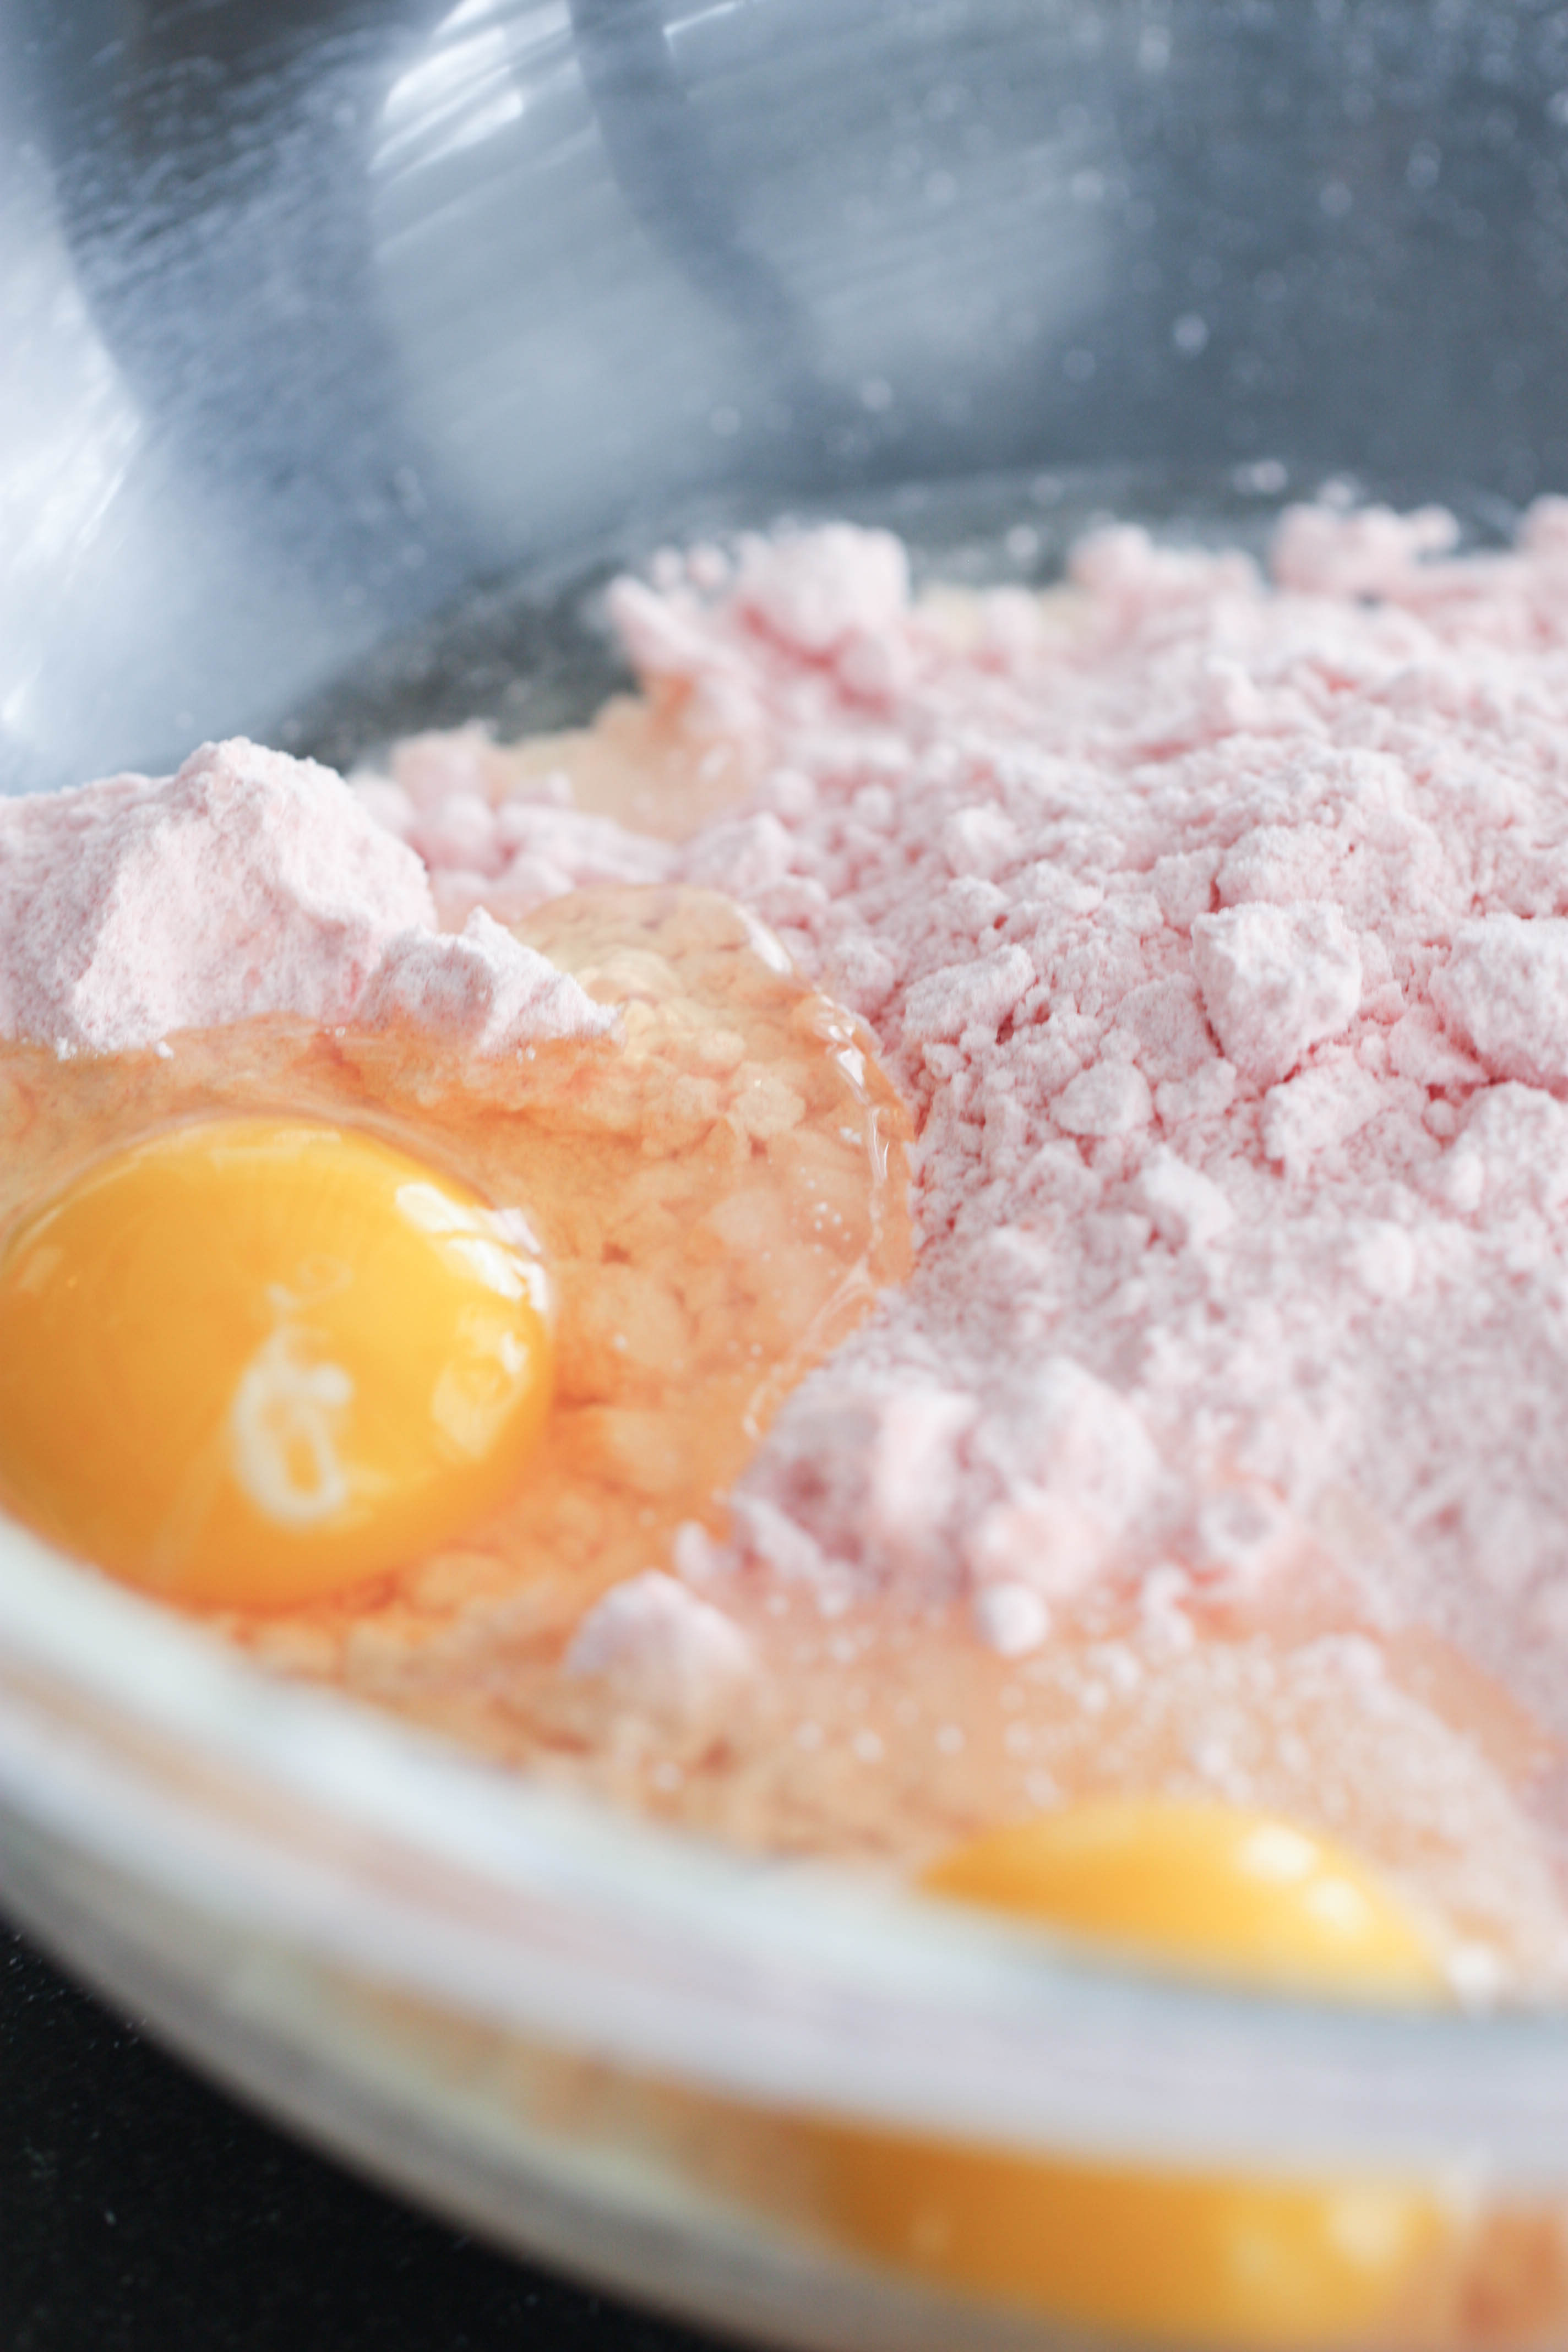 Strawberry cake mix with eggs in a glass bowl